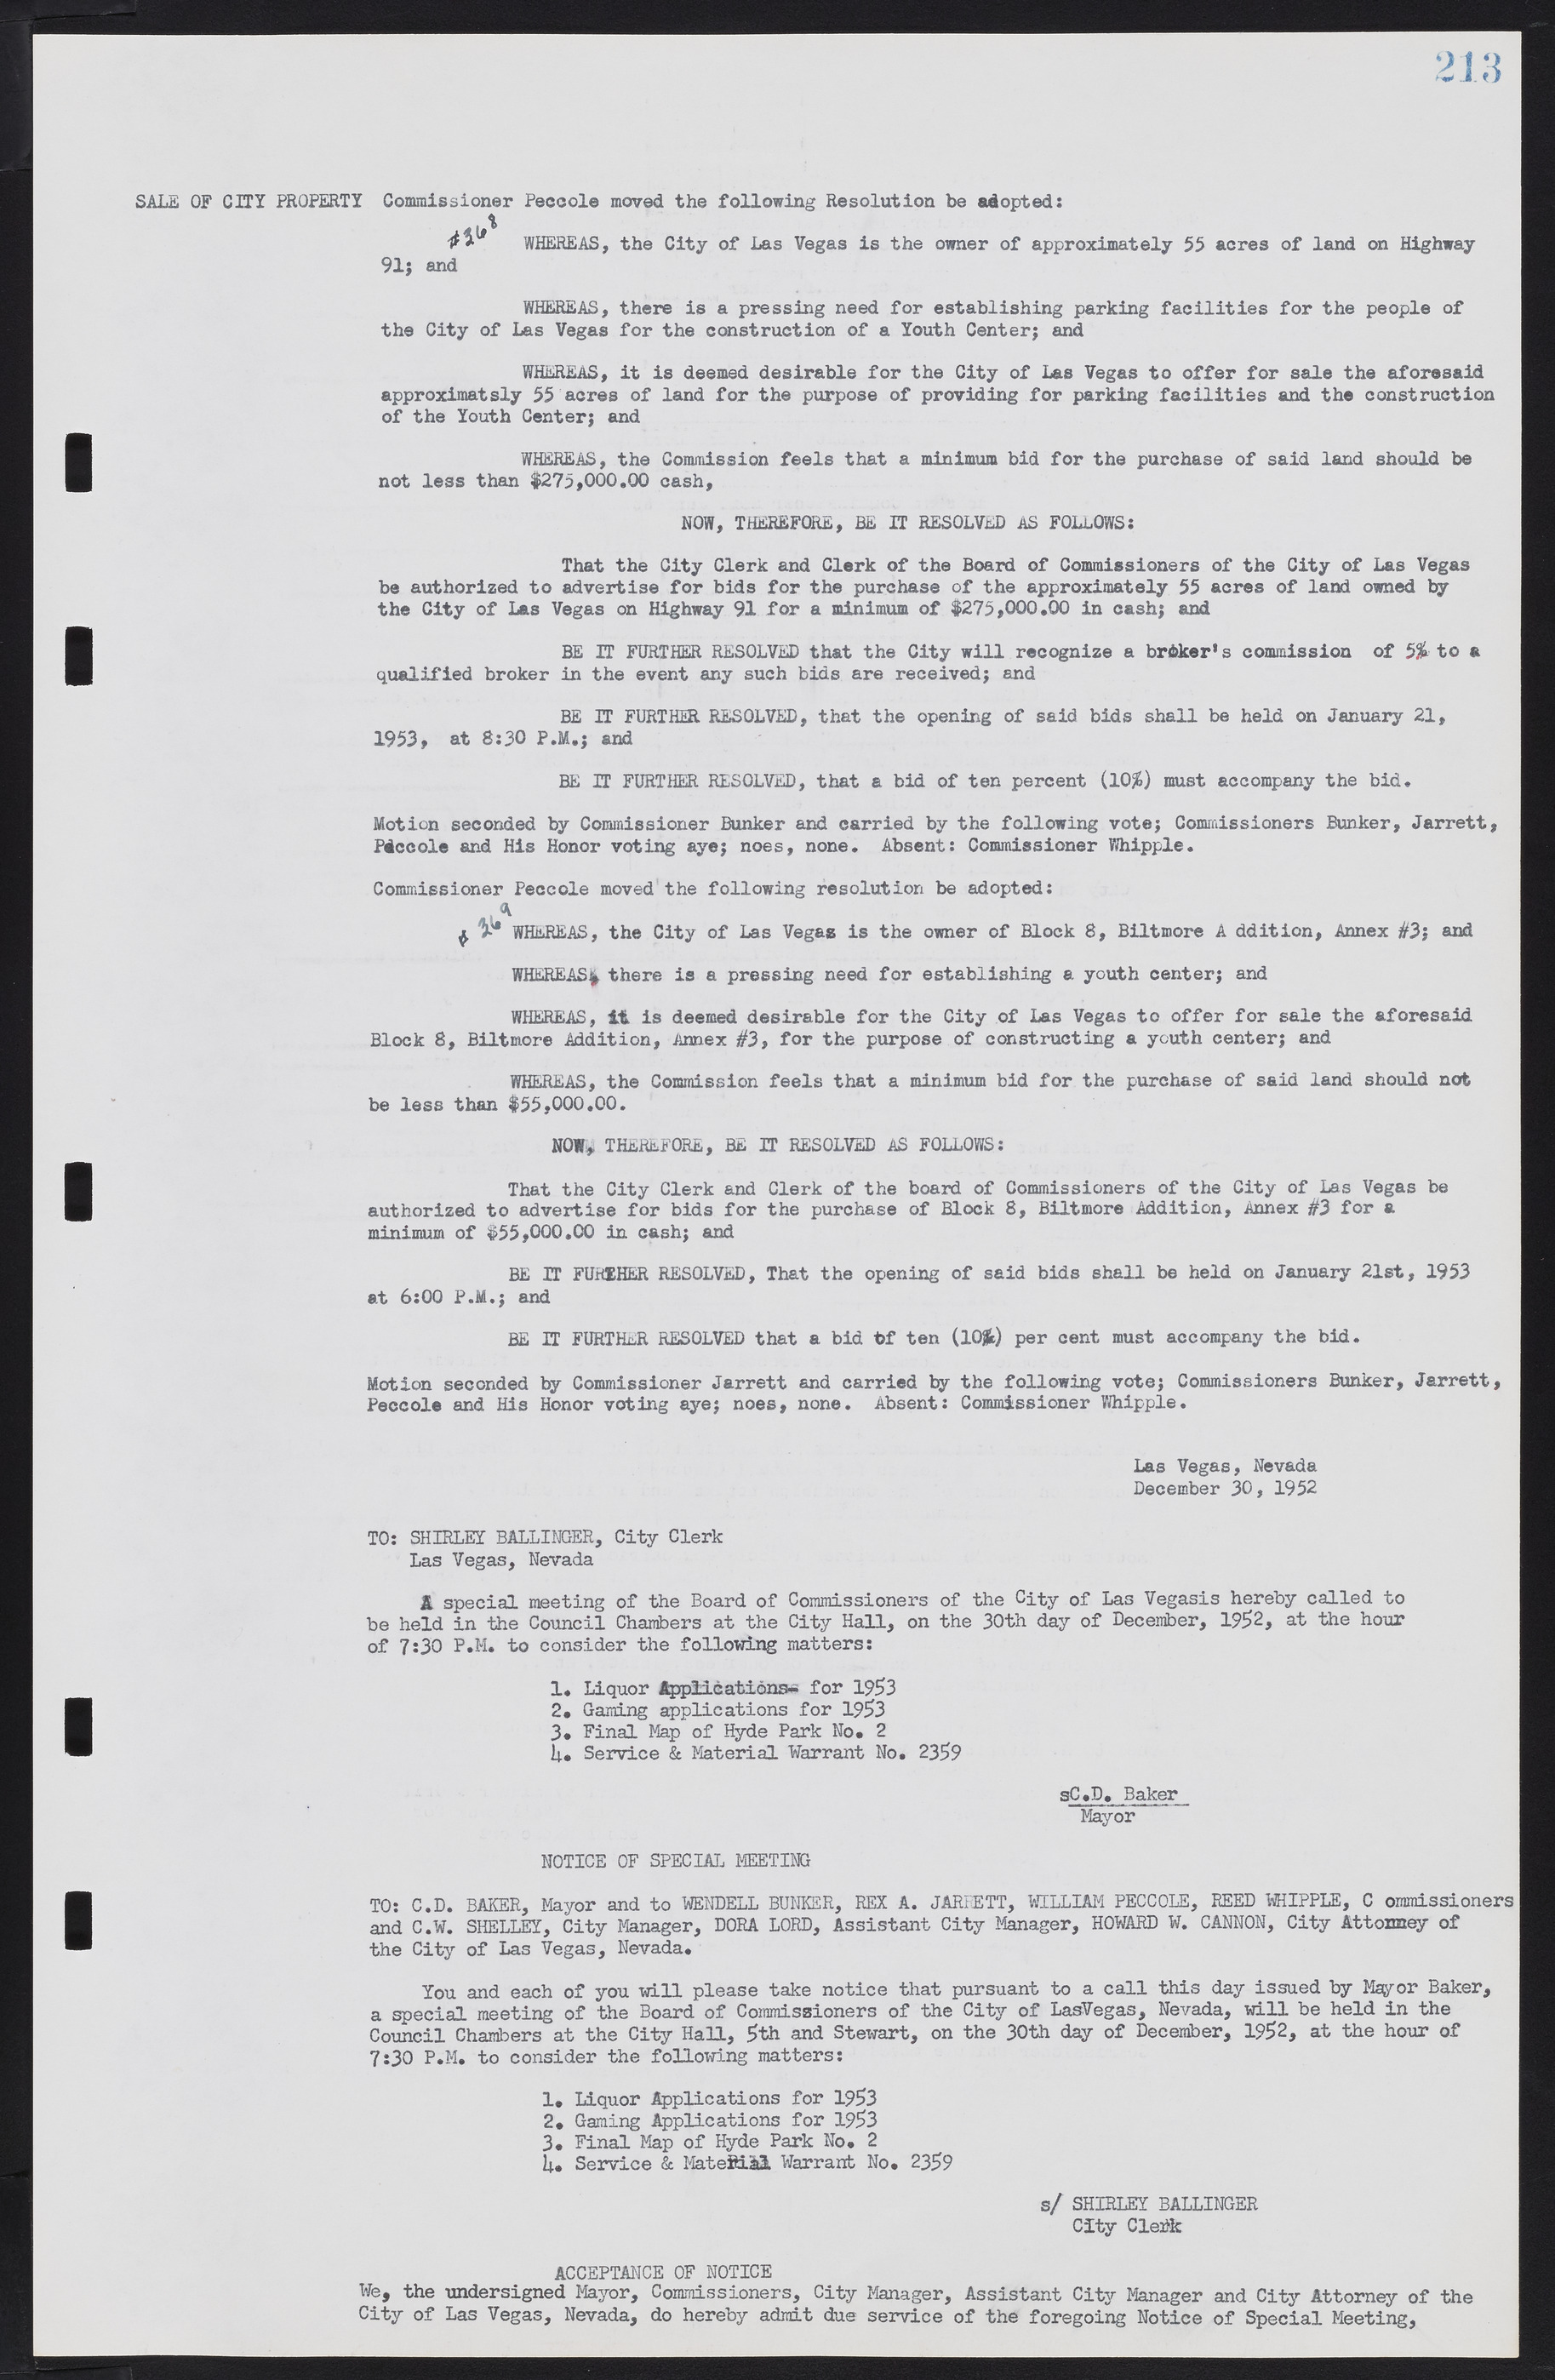 Las Vegas City Commission Minutes, May 26, 1952 to February 17, 1954, lvc000008-227